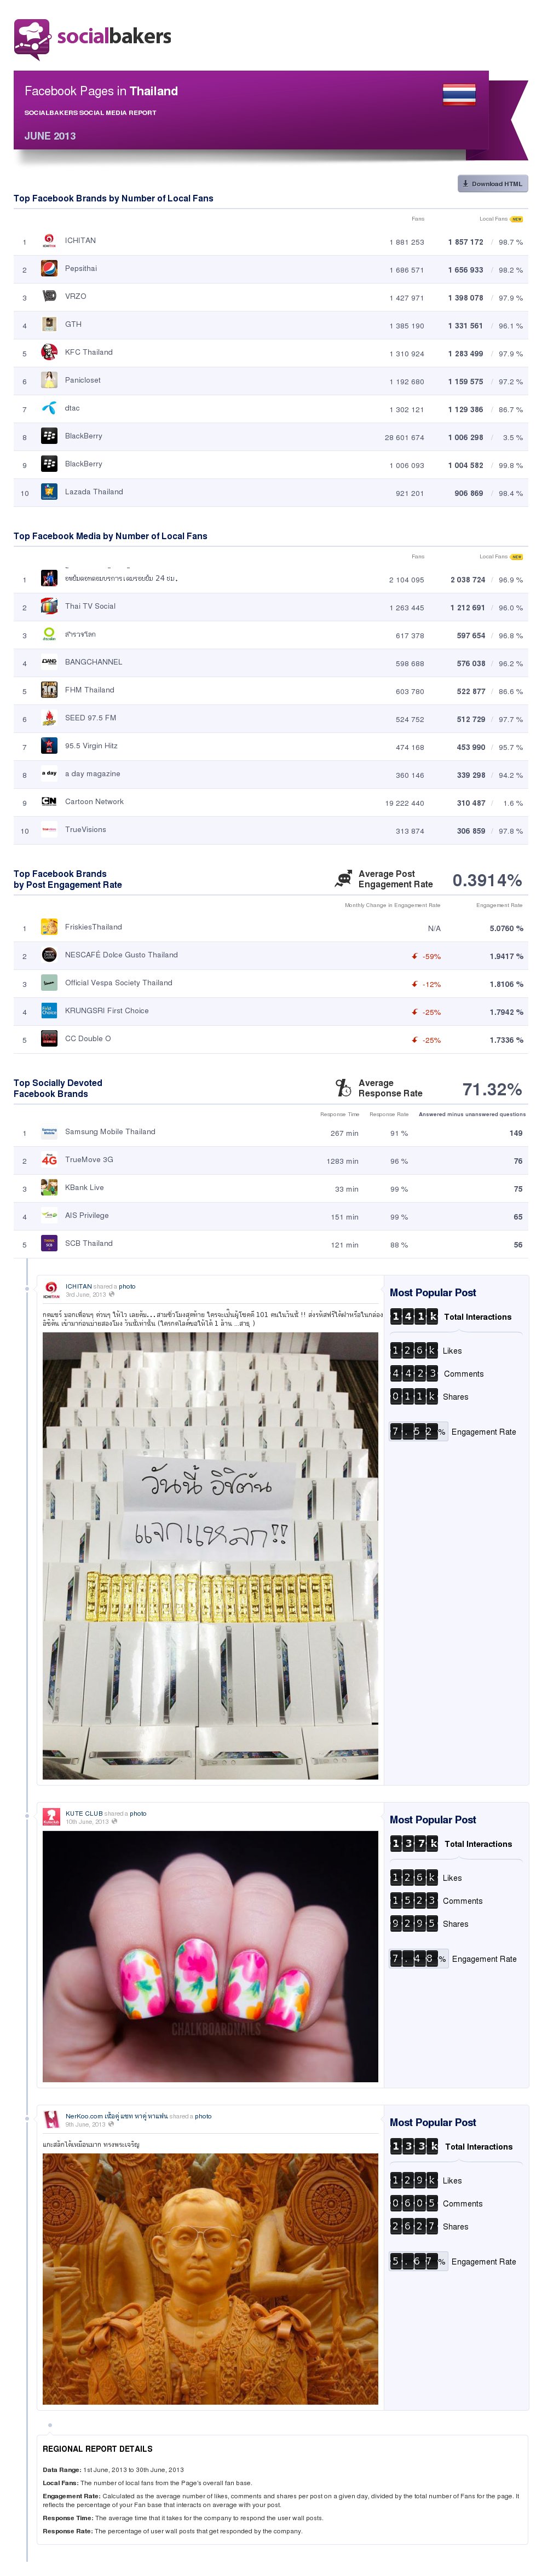 june-2013-social-media-report-facebook-pages-in-thailand